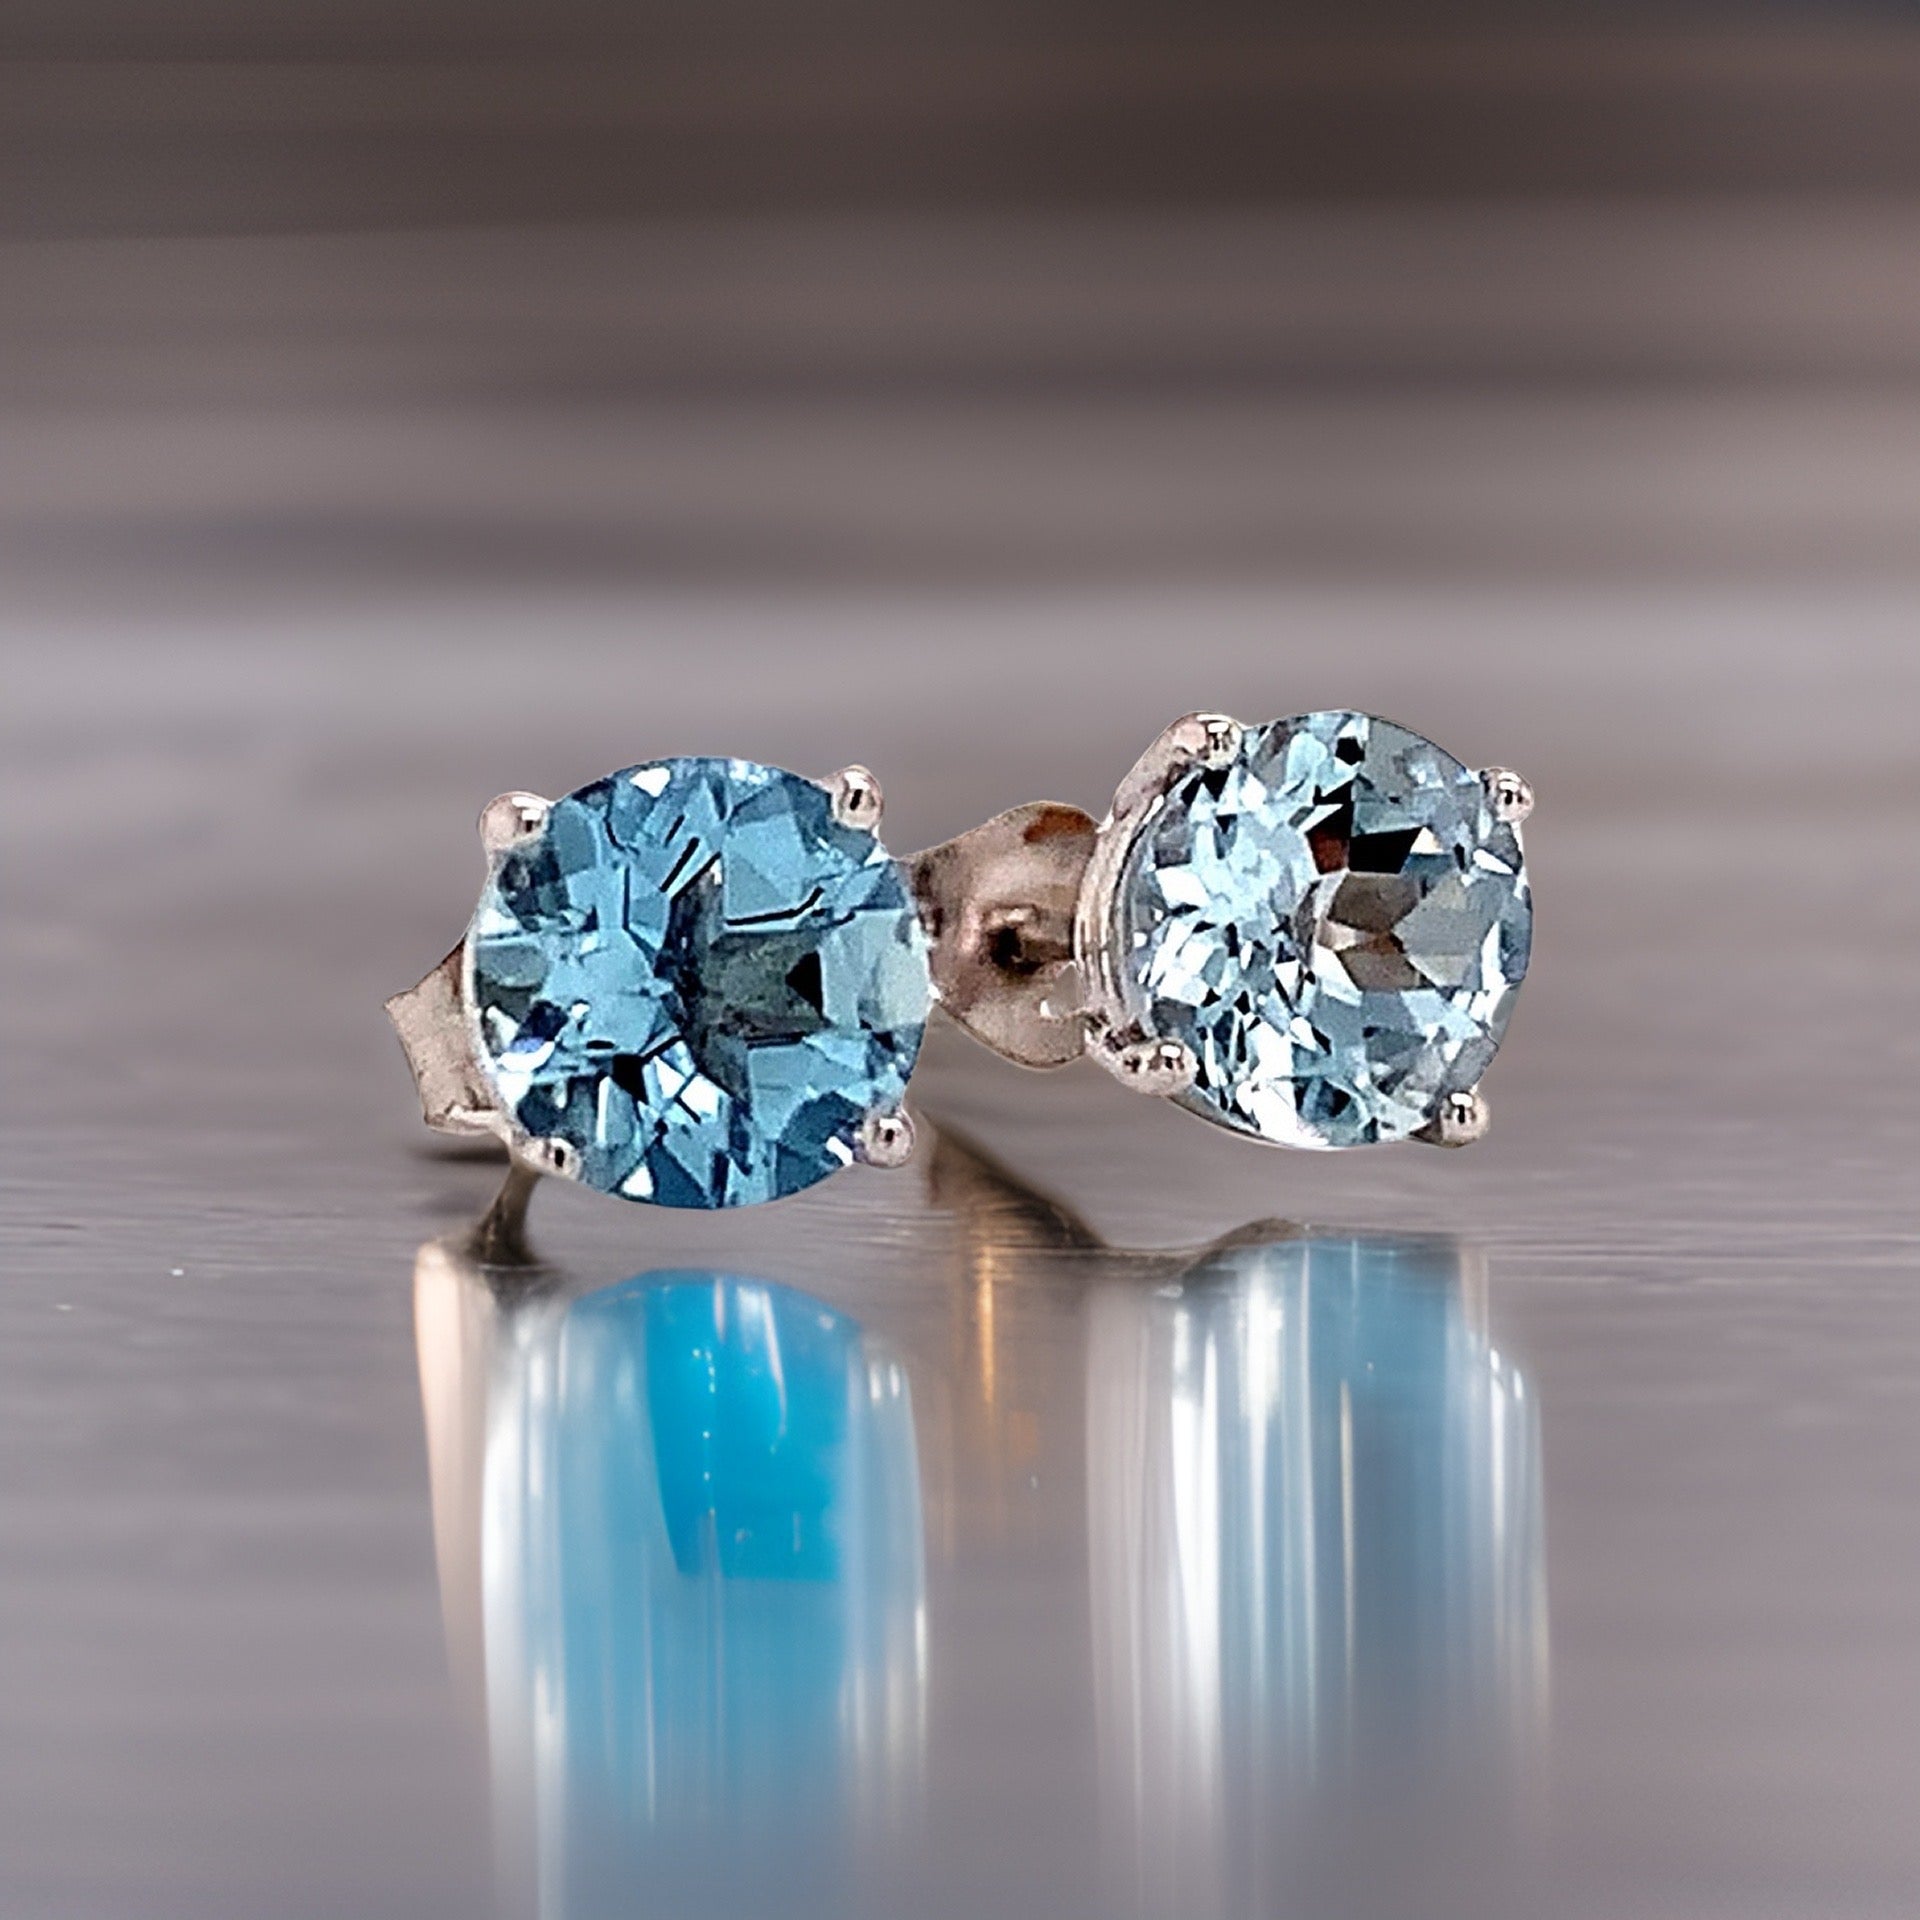 Natural Aquamarine Stud Earrings 14k White Gold 1.0 CTW Certified $590 111539 - Certified Fine Jewelry